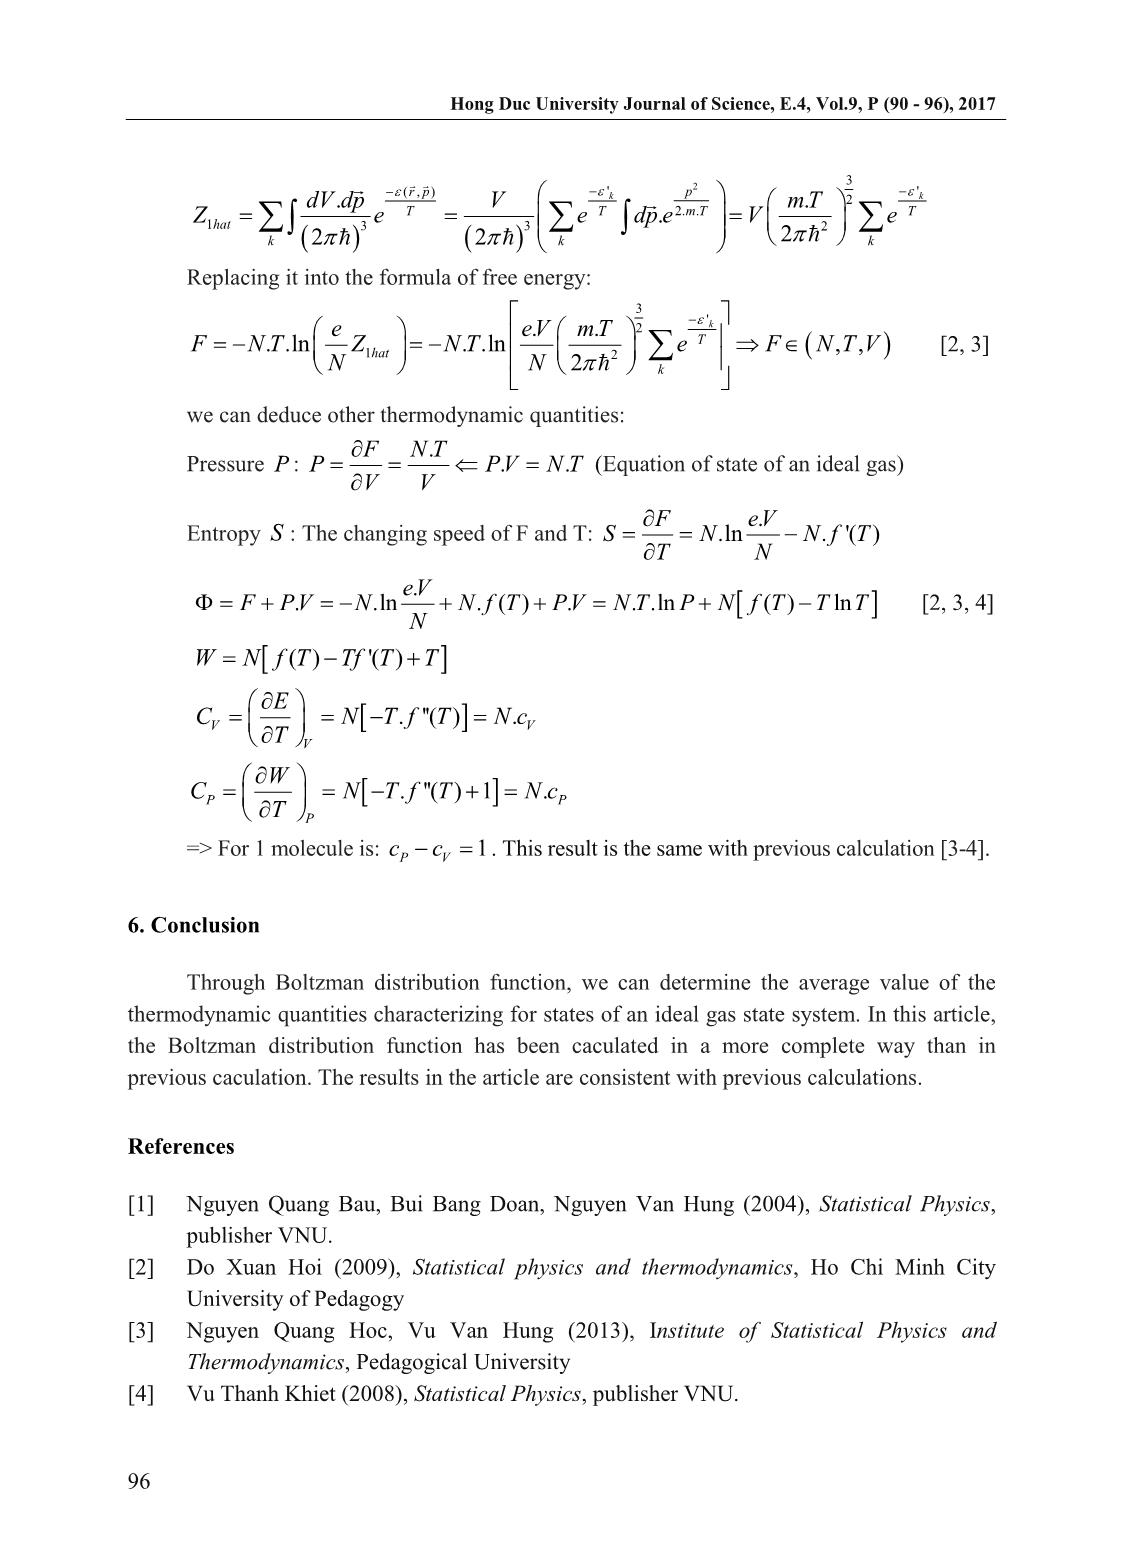 Study boltzman distribution function for ideal gas system trang 7